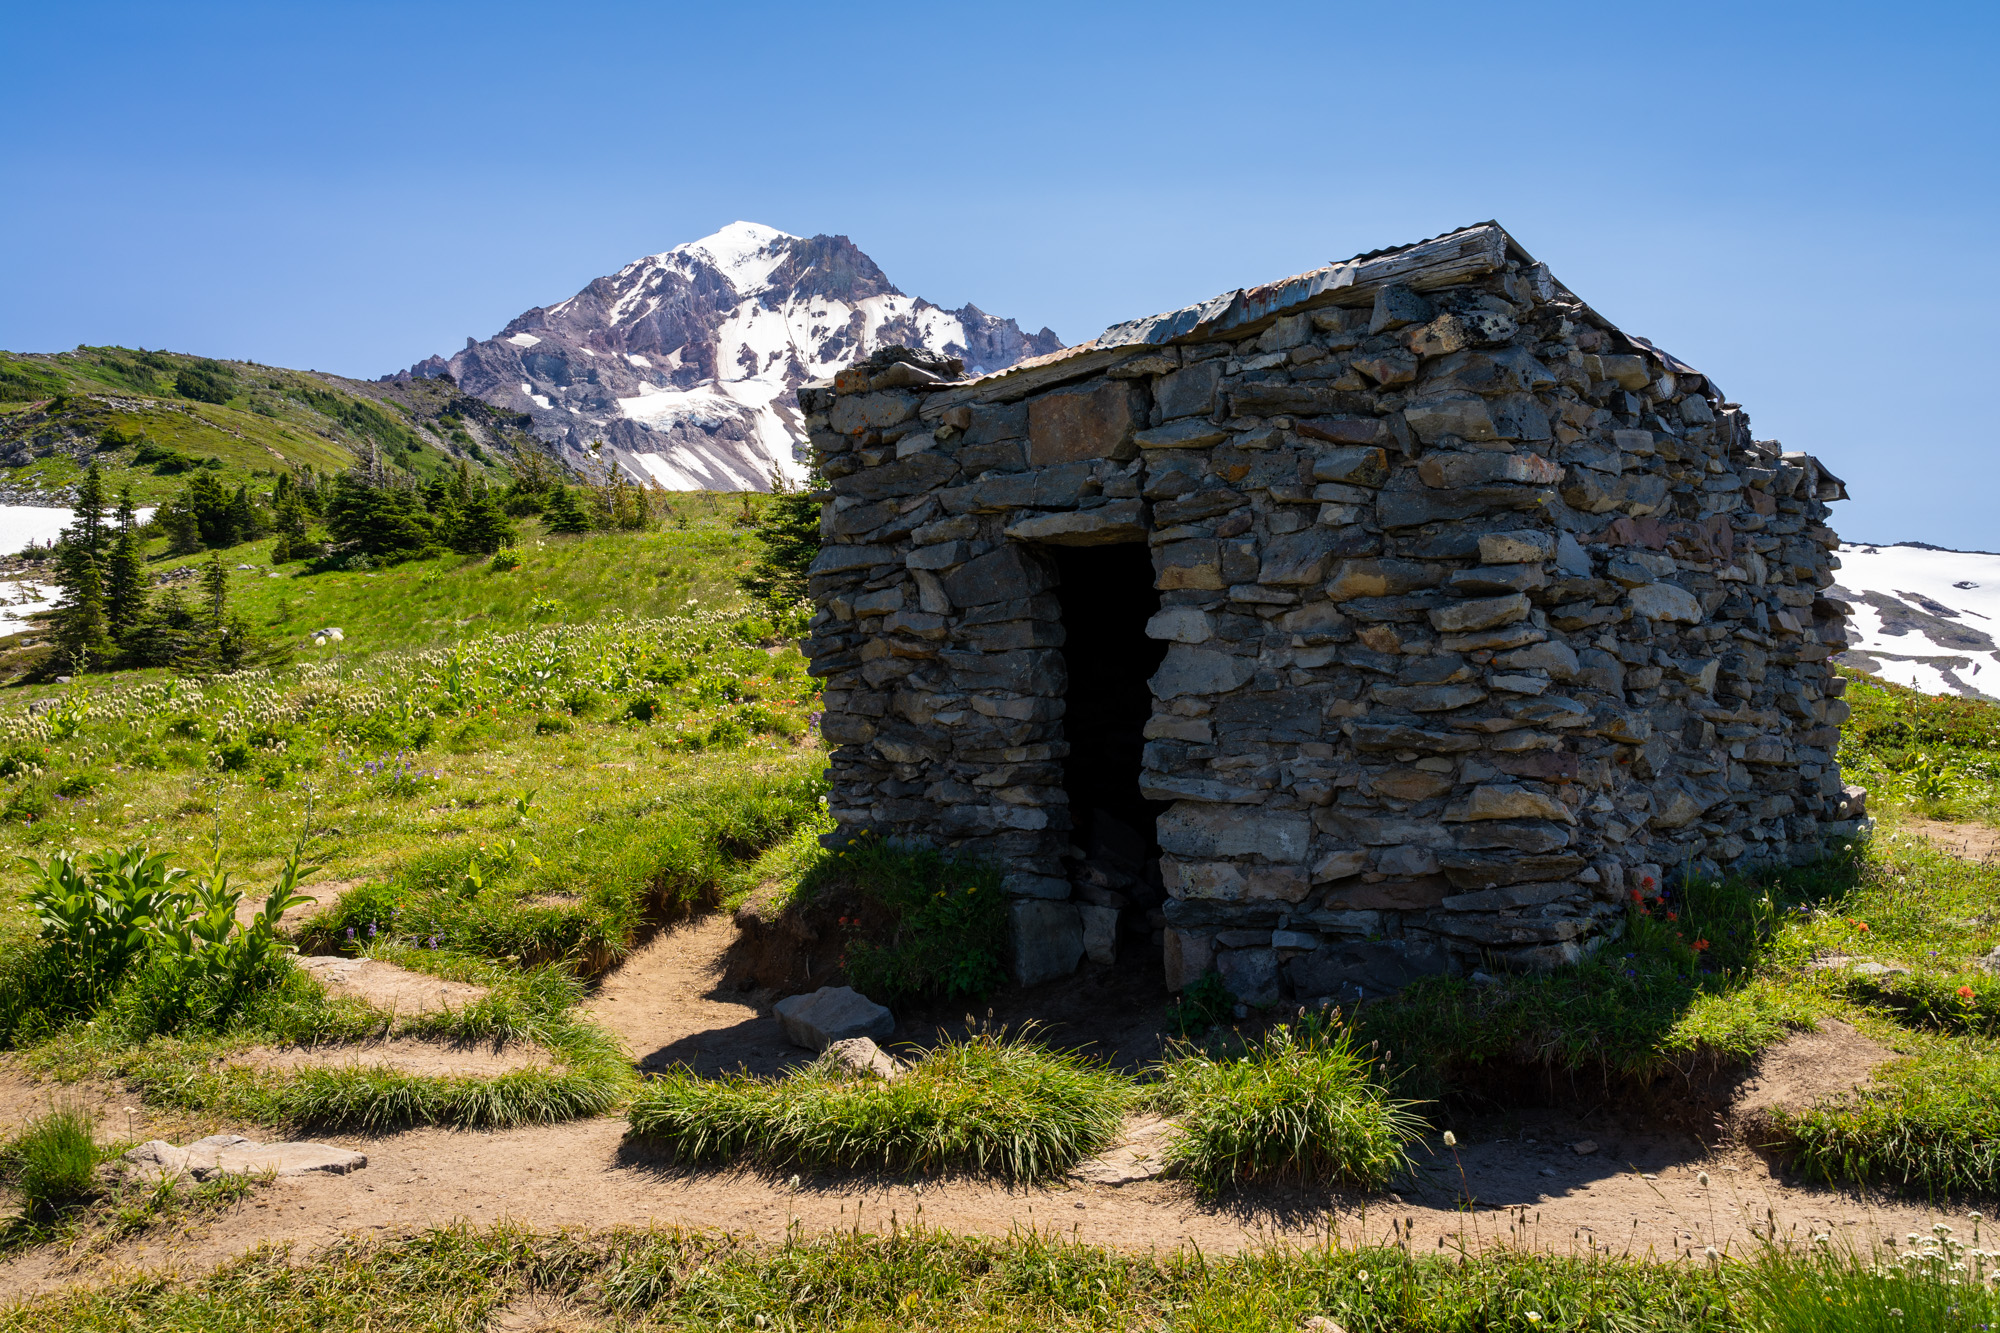 Mcneil Point and the stone shelter